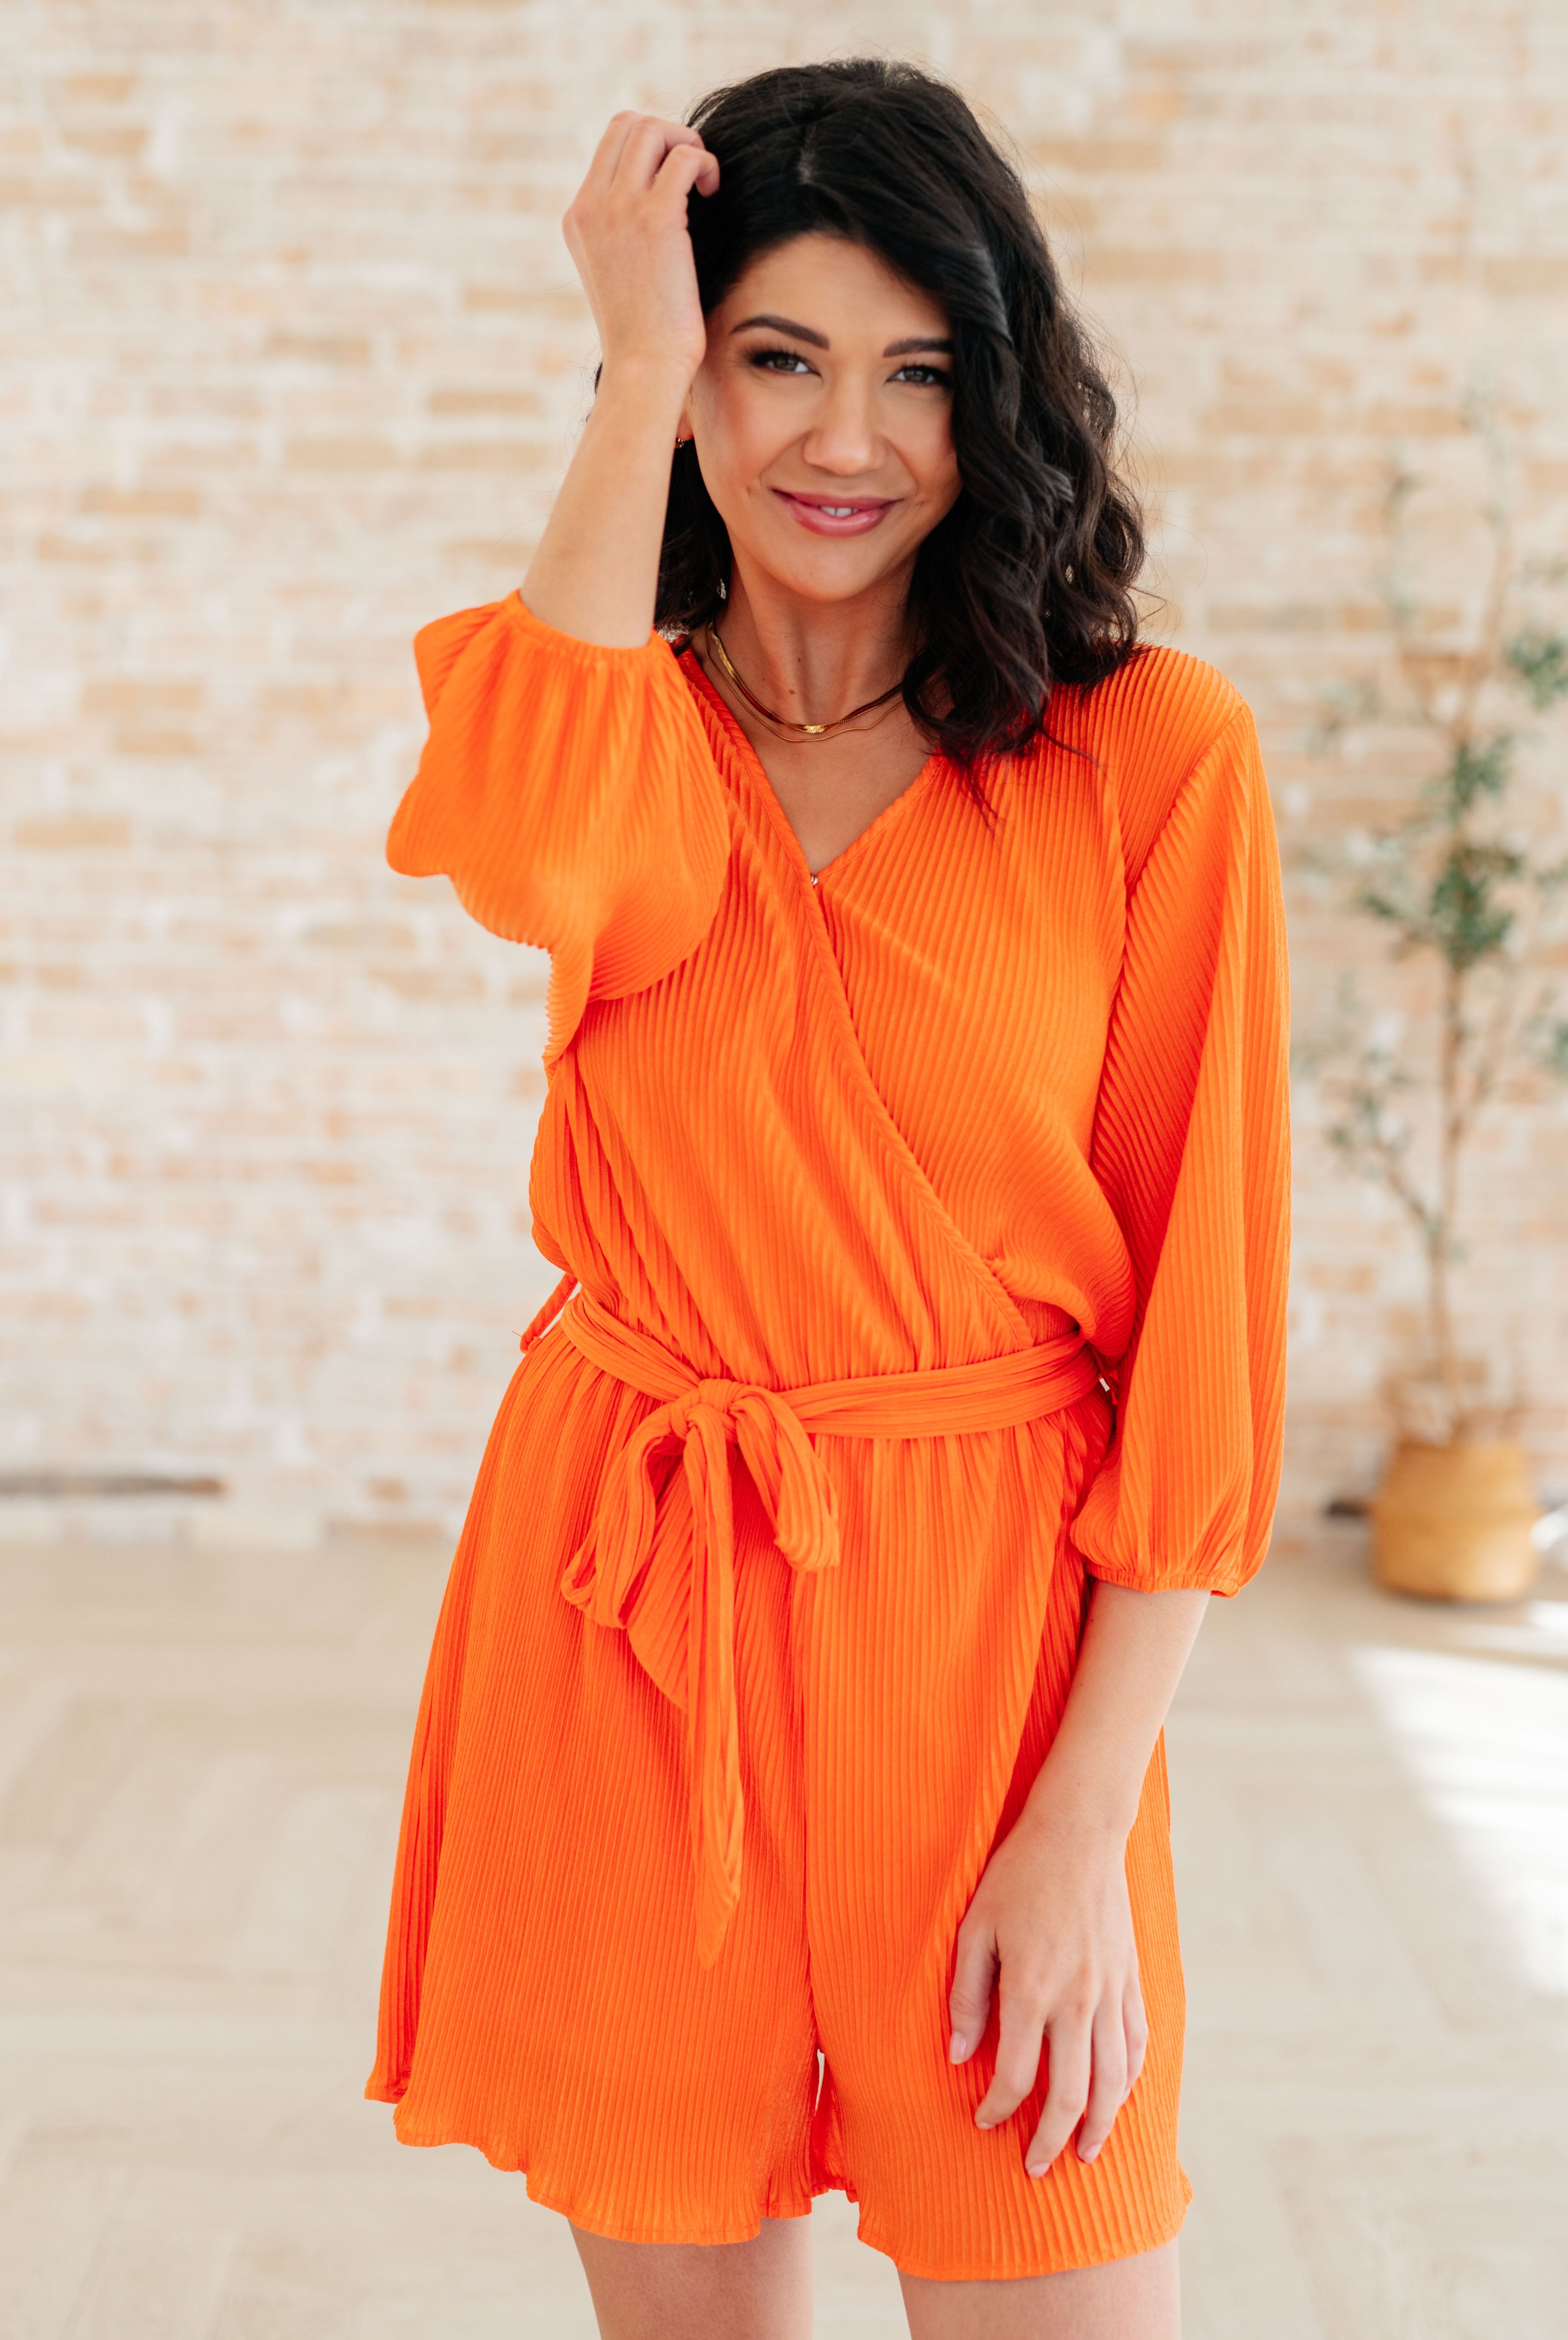 Roll With me Romper in Tangerine-Jumpsuits & Rompers-Ave Shops-Urban Threadz Boutique, Women's Fashion Boutique in Saugatuck, MI